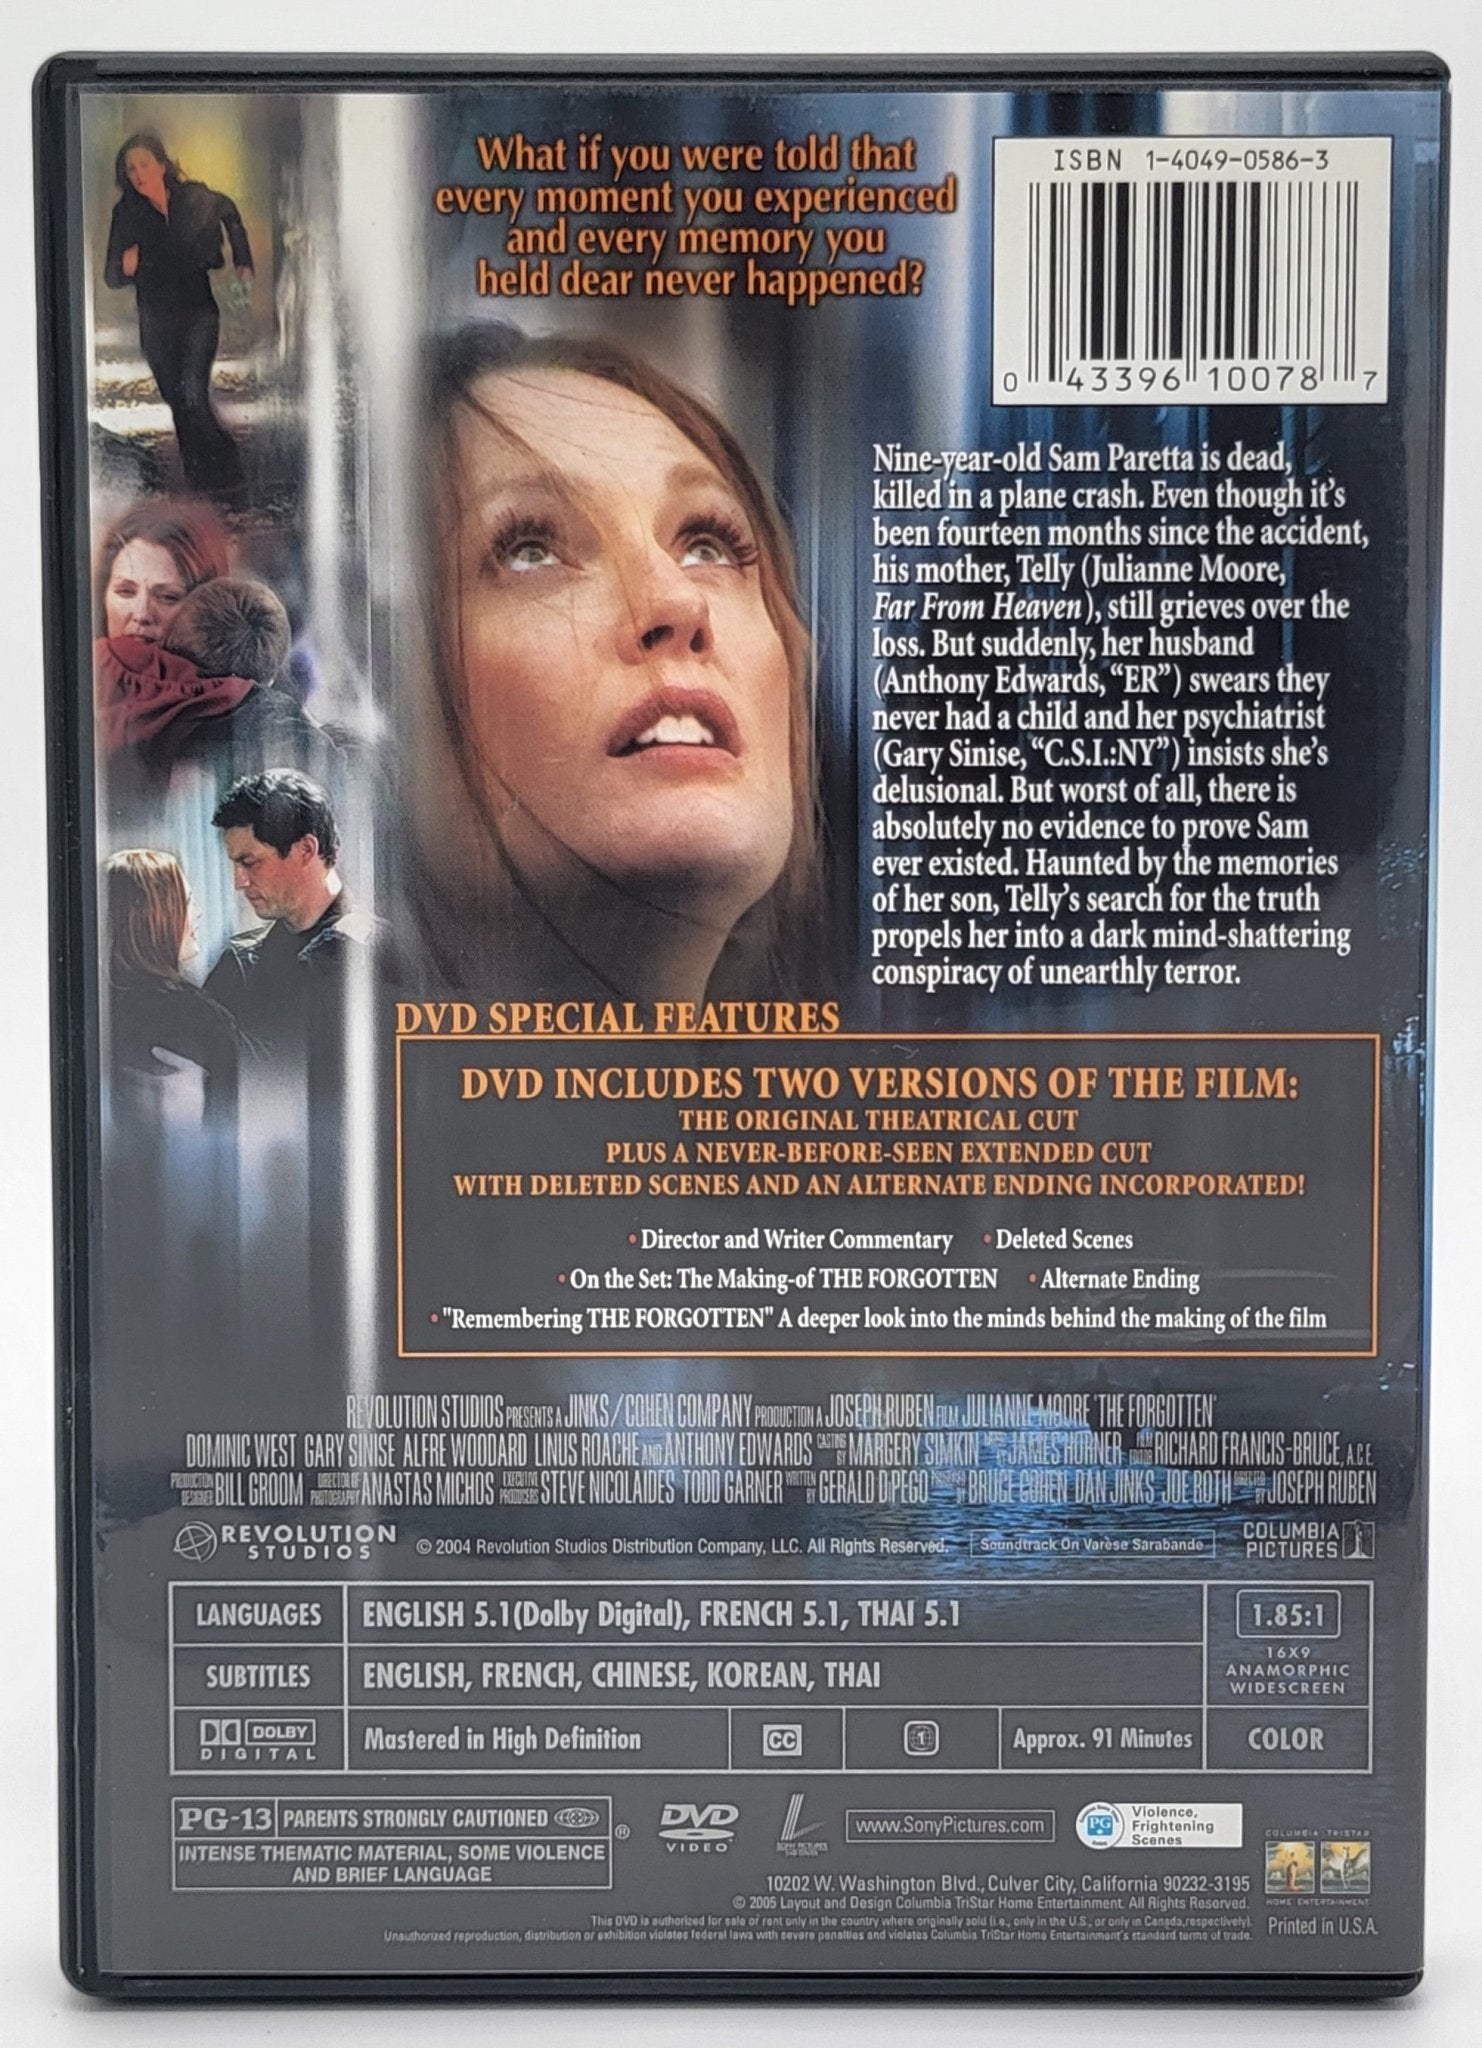 Sony Pictures Home Entertainment - The Forgotten | DVD | Widescreen - DVD - Steady Bunny Shop